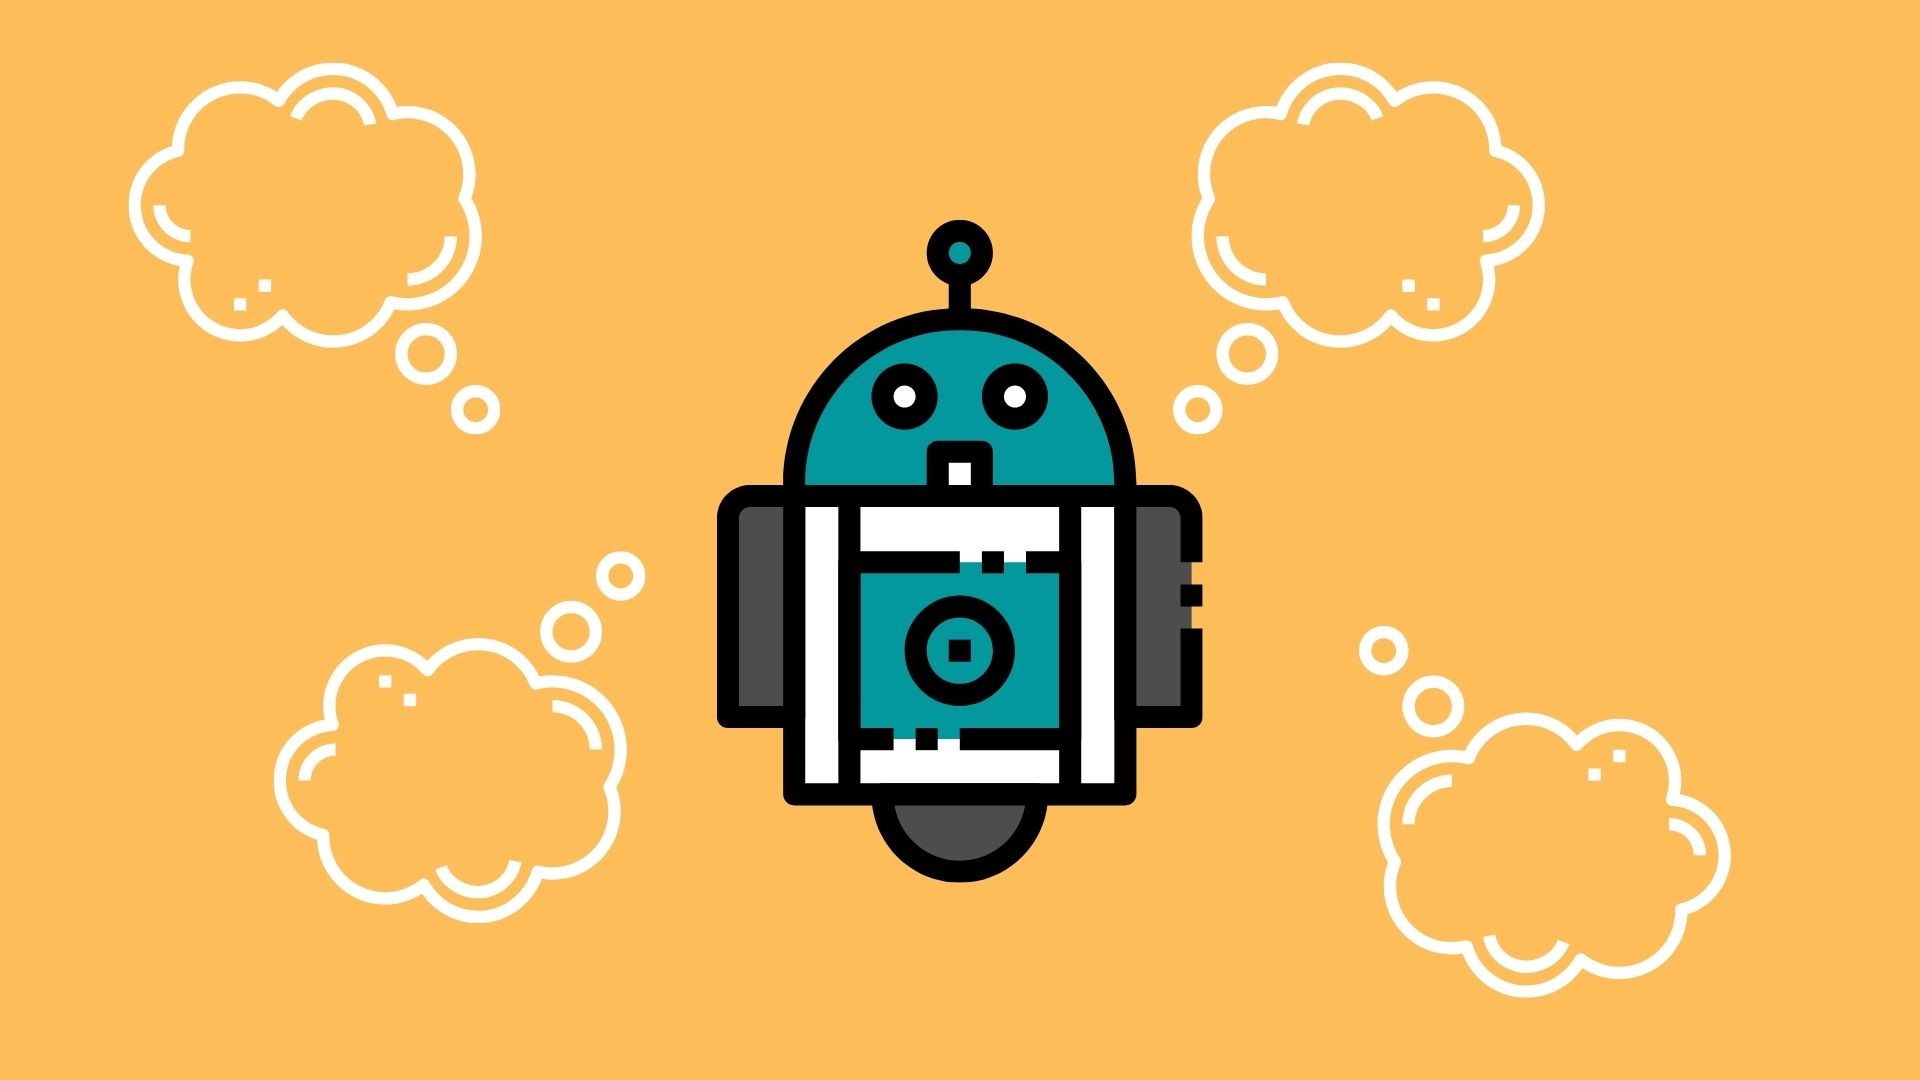 A cute blue SEO robot on an orange background with white thought bubbles